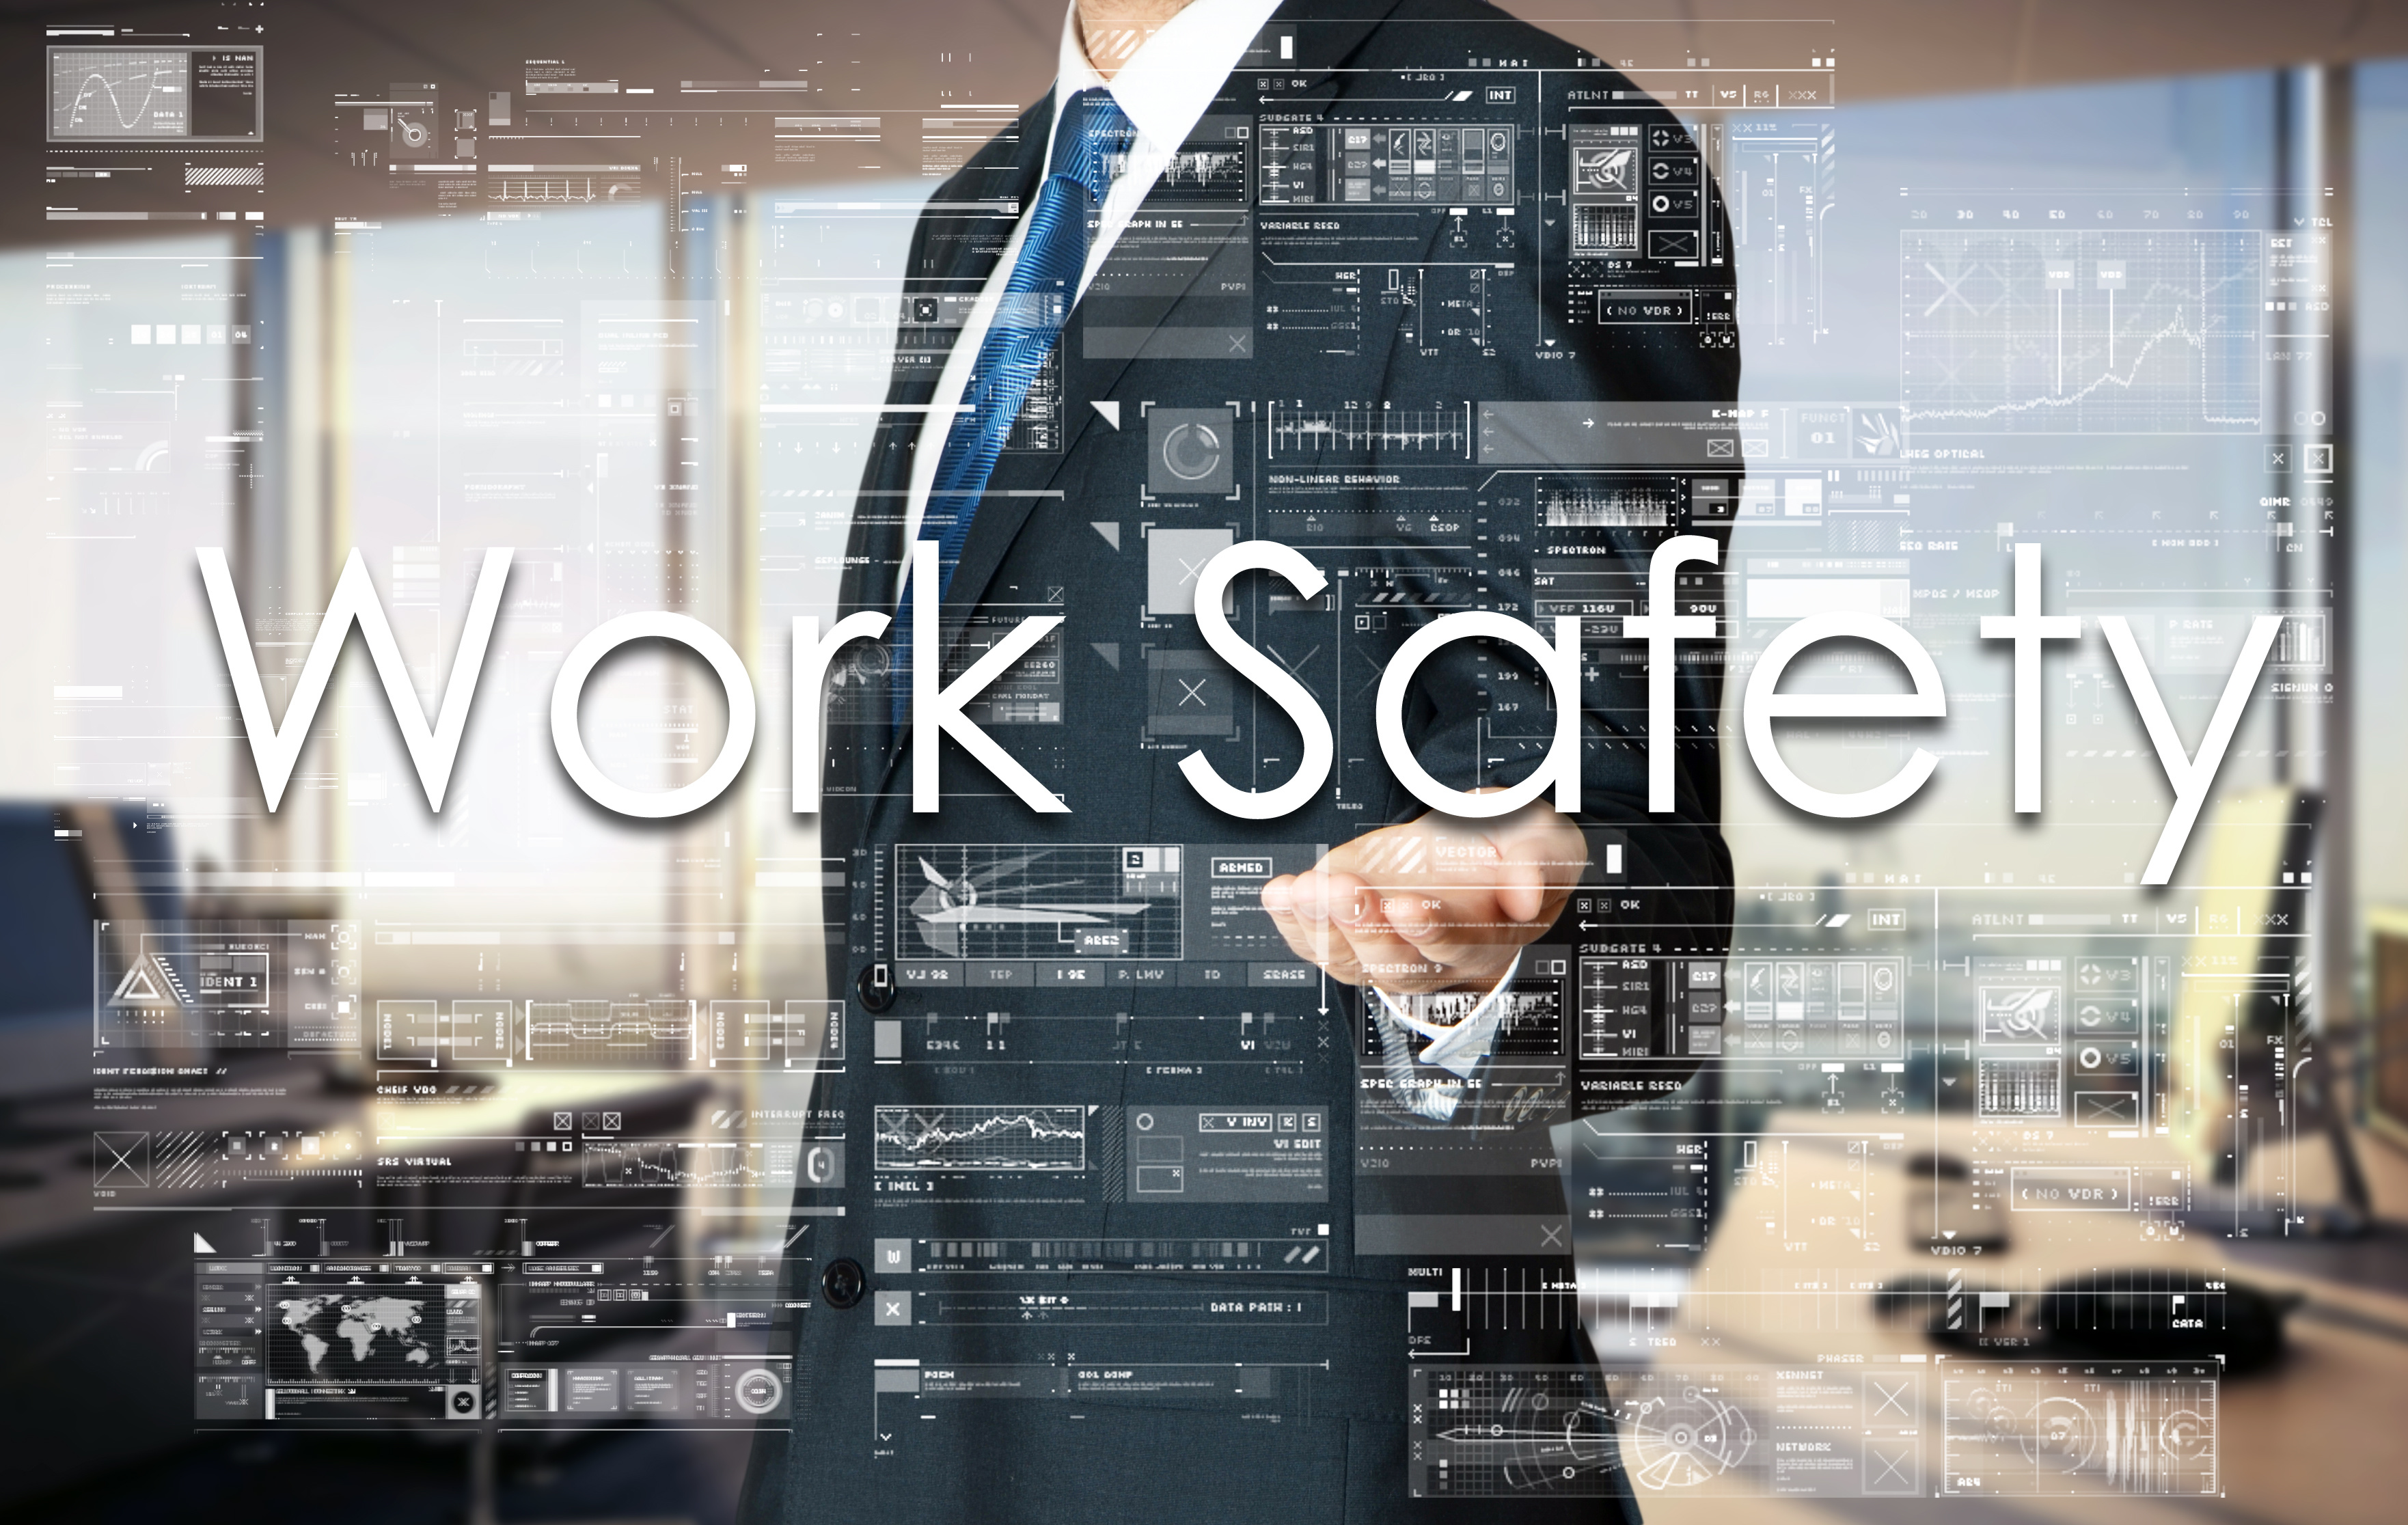 4 Strategies to Improve Workplace Safety